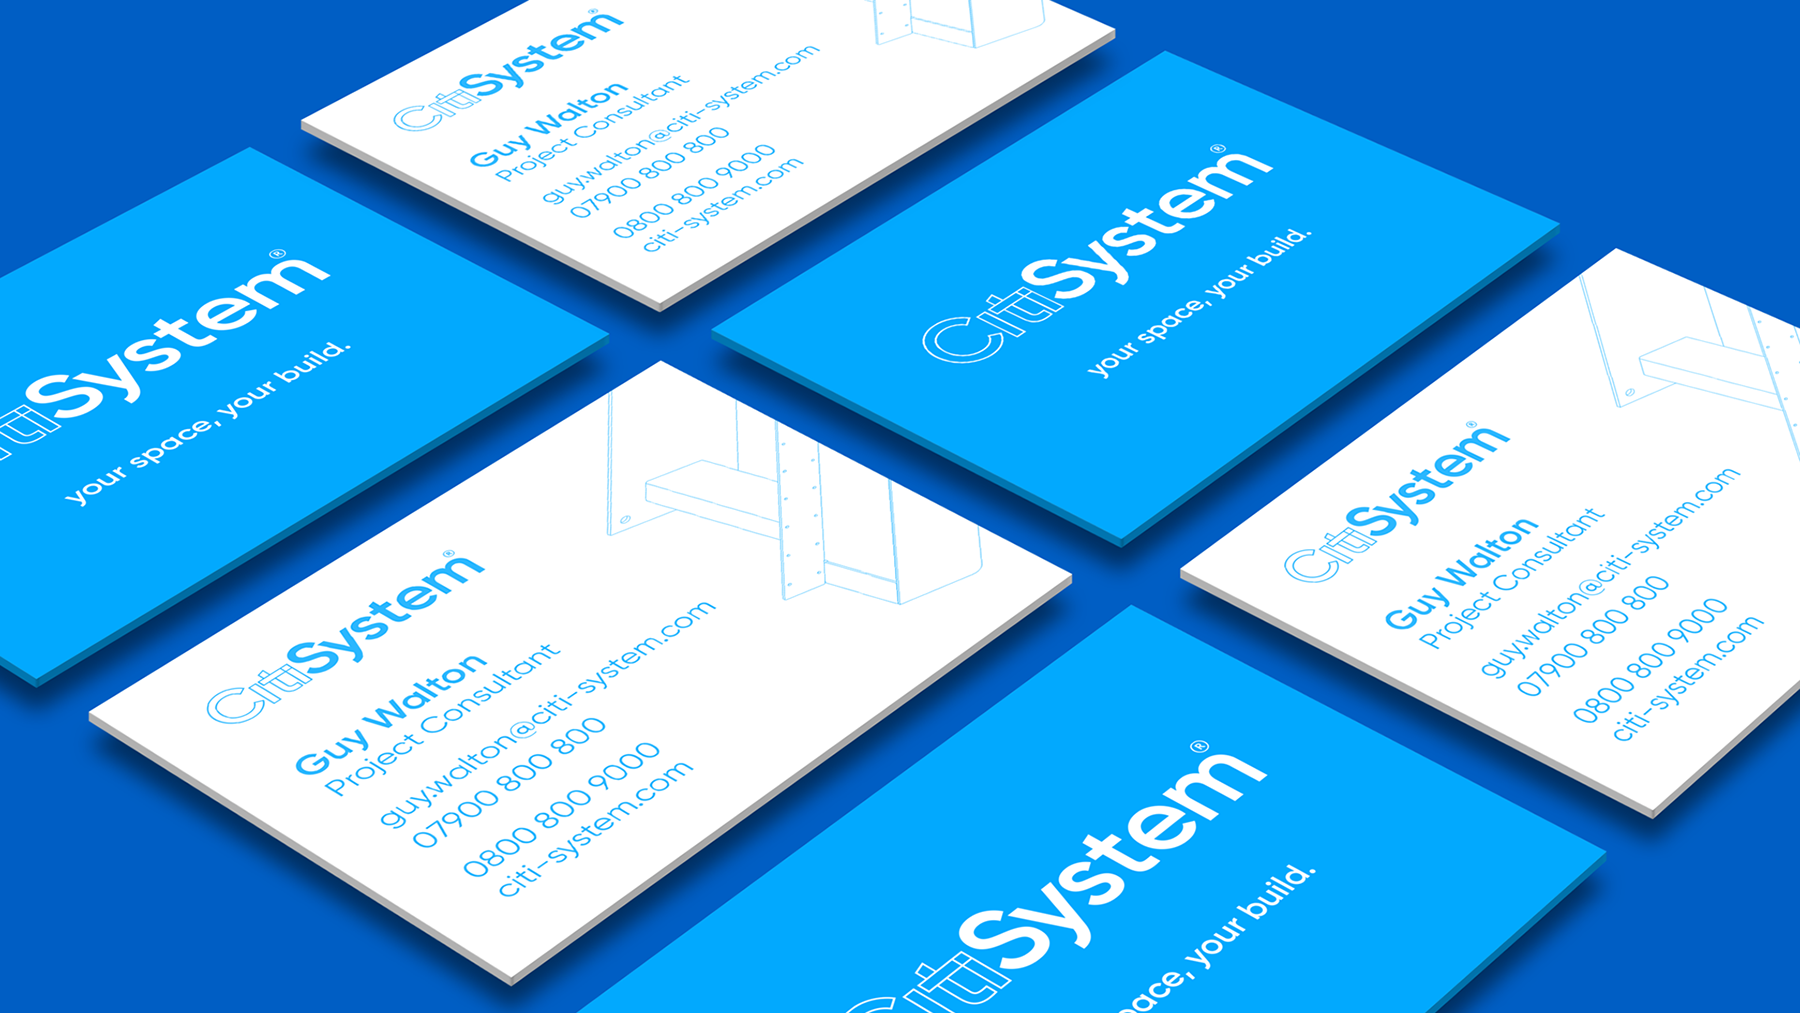 Business card design for Citi System arranged in tiles.